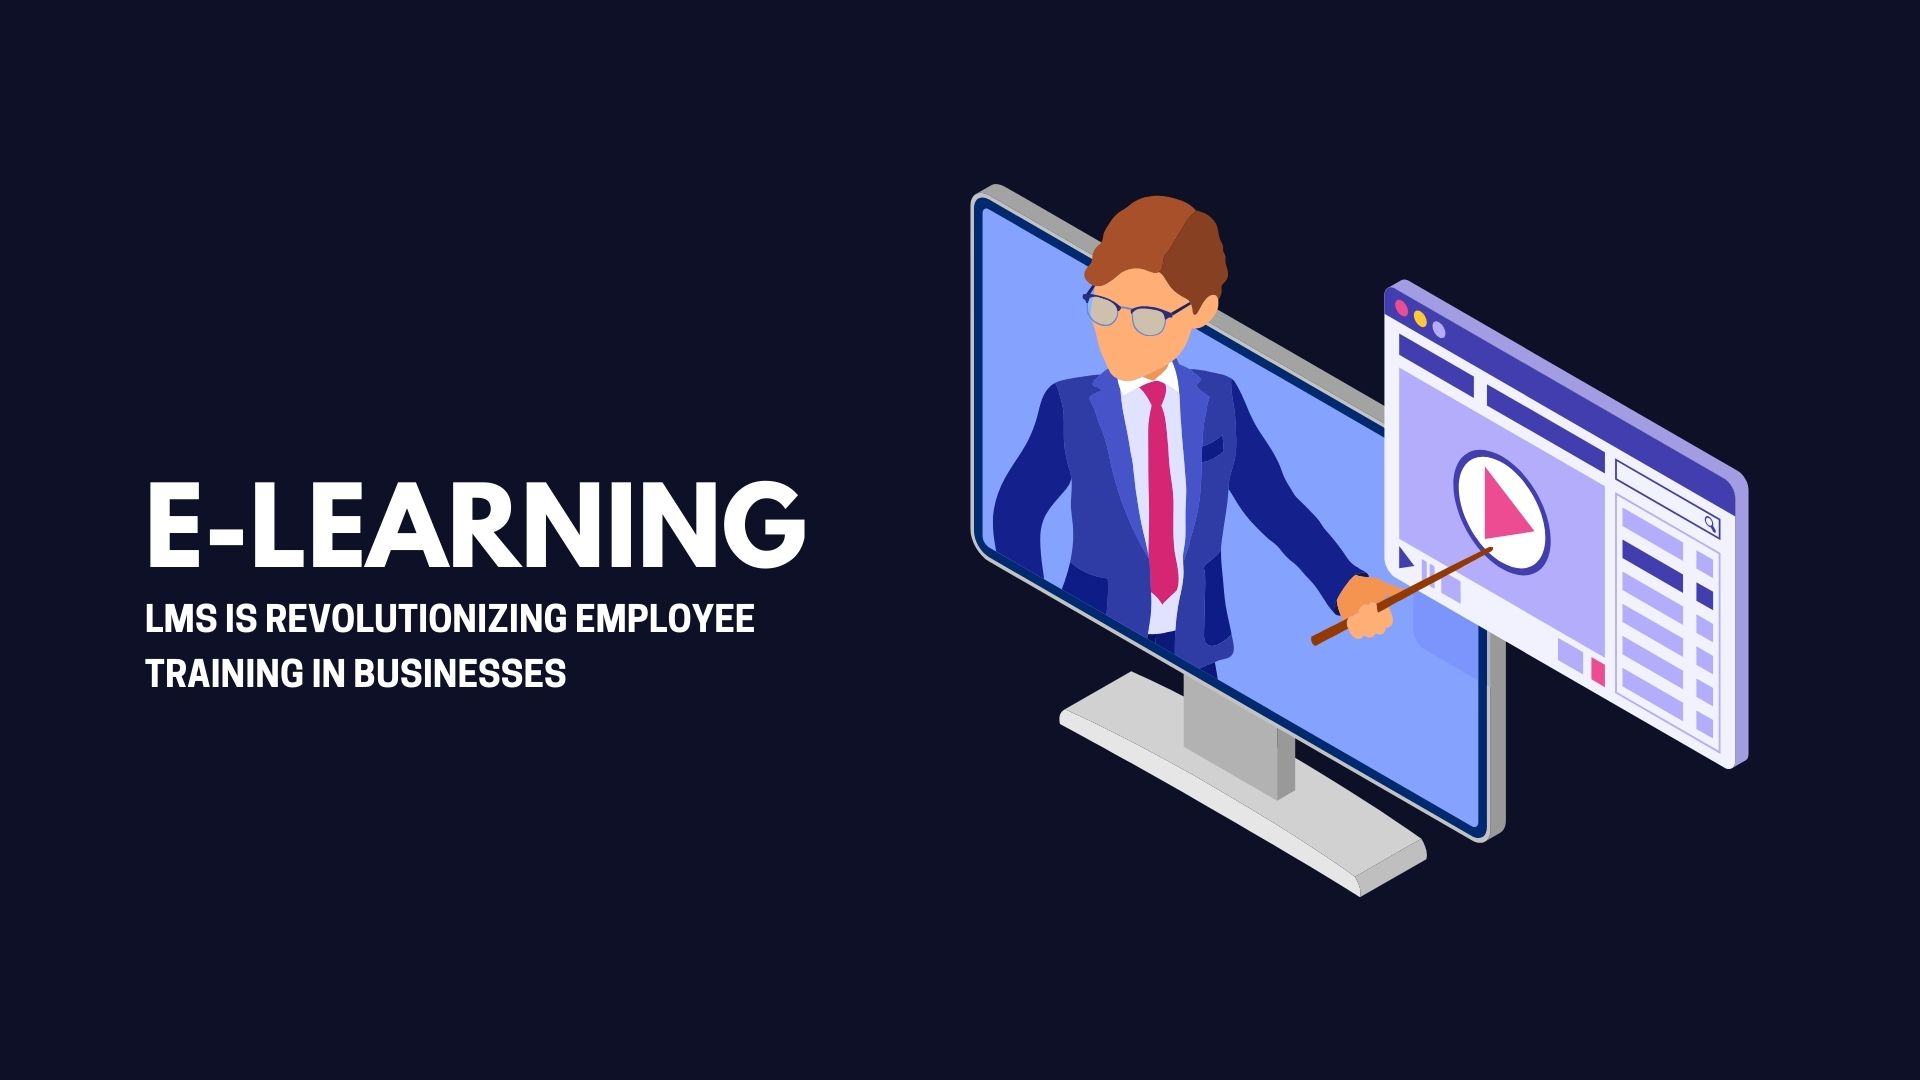 The Rise of E-Learning: How LMS is Revolutionizing Employee Training in Businesses